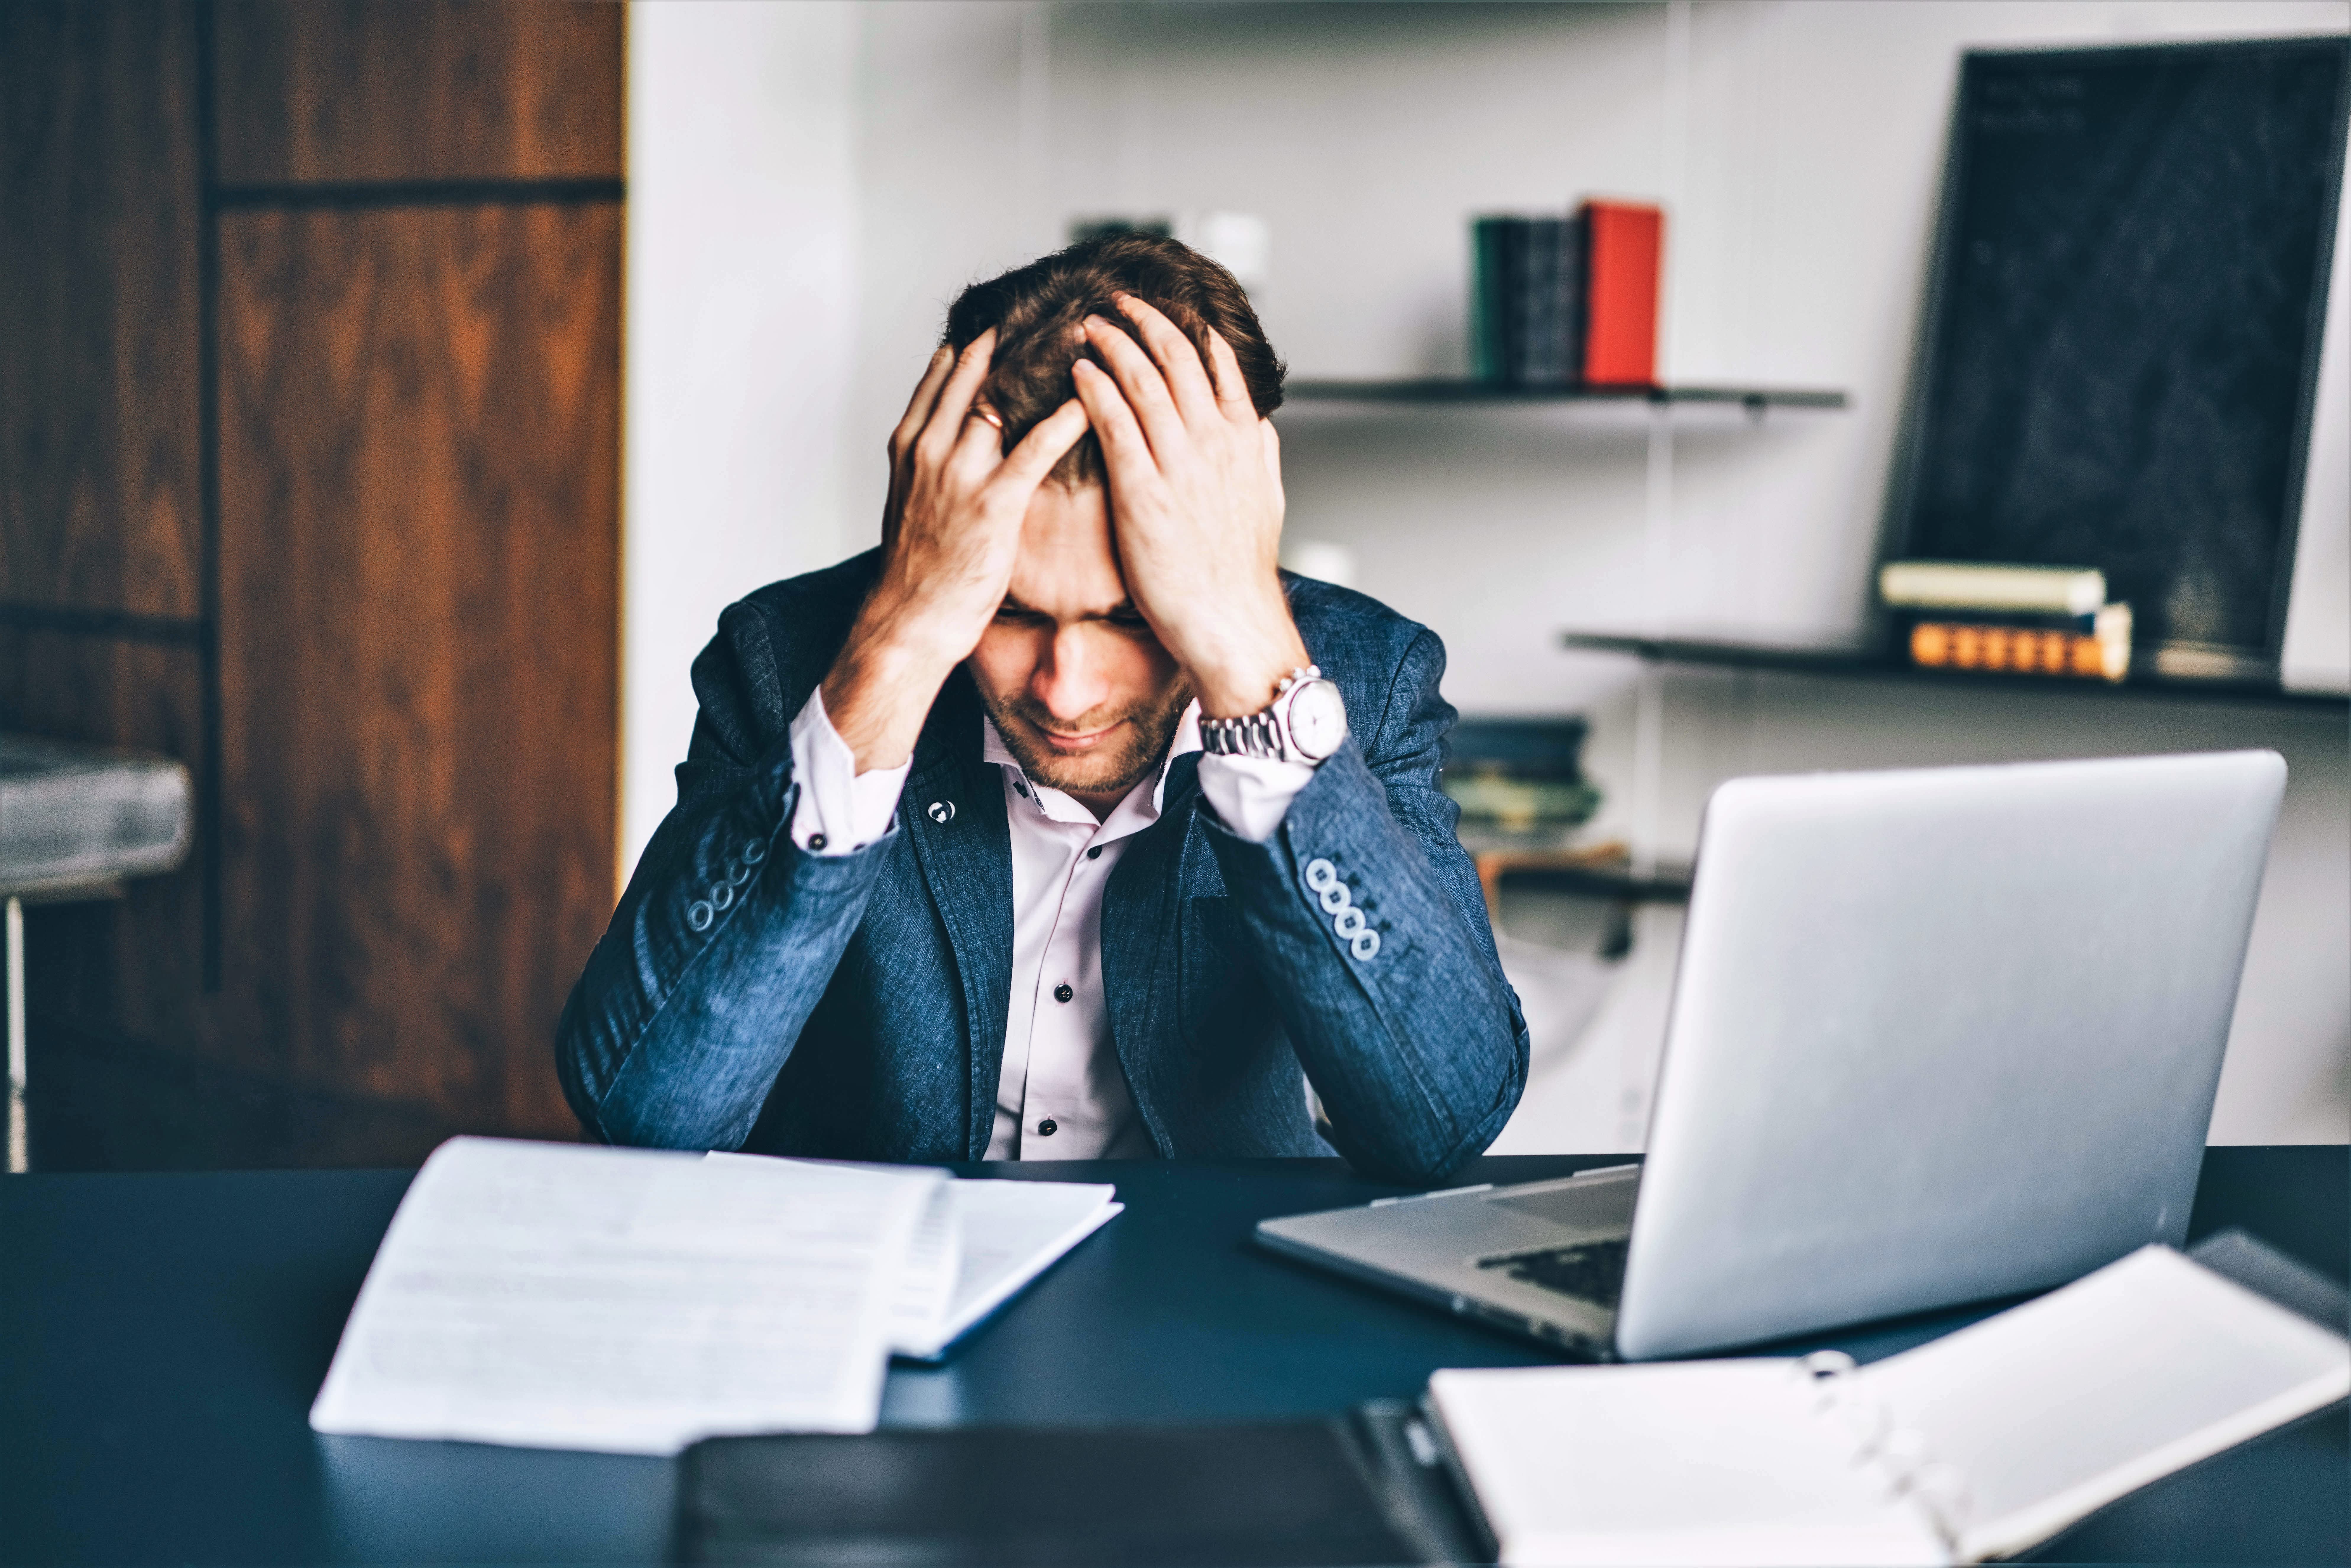 Work burnout is its own epidemic. Here’s how to stop the spread